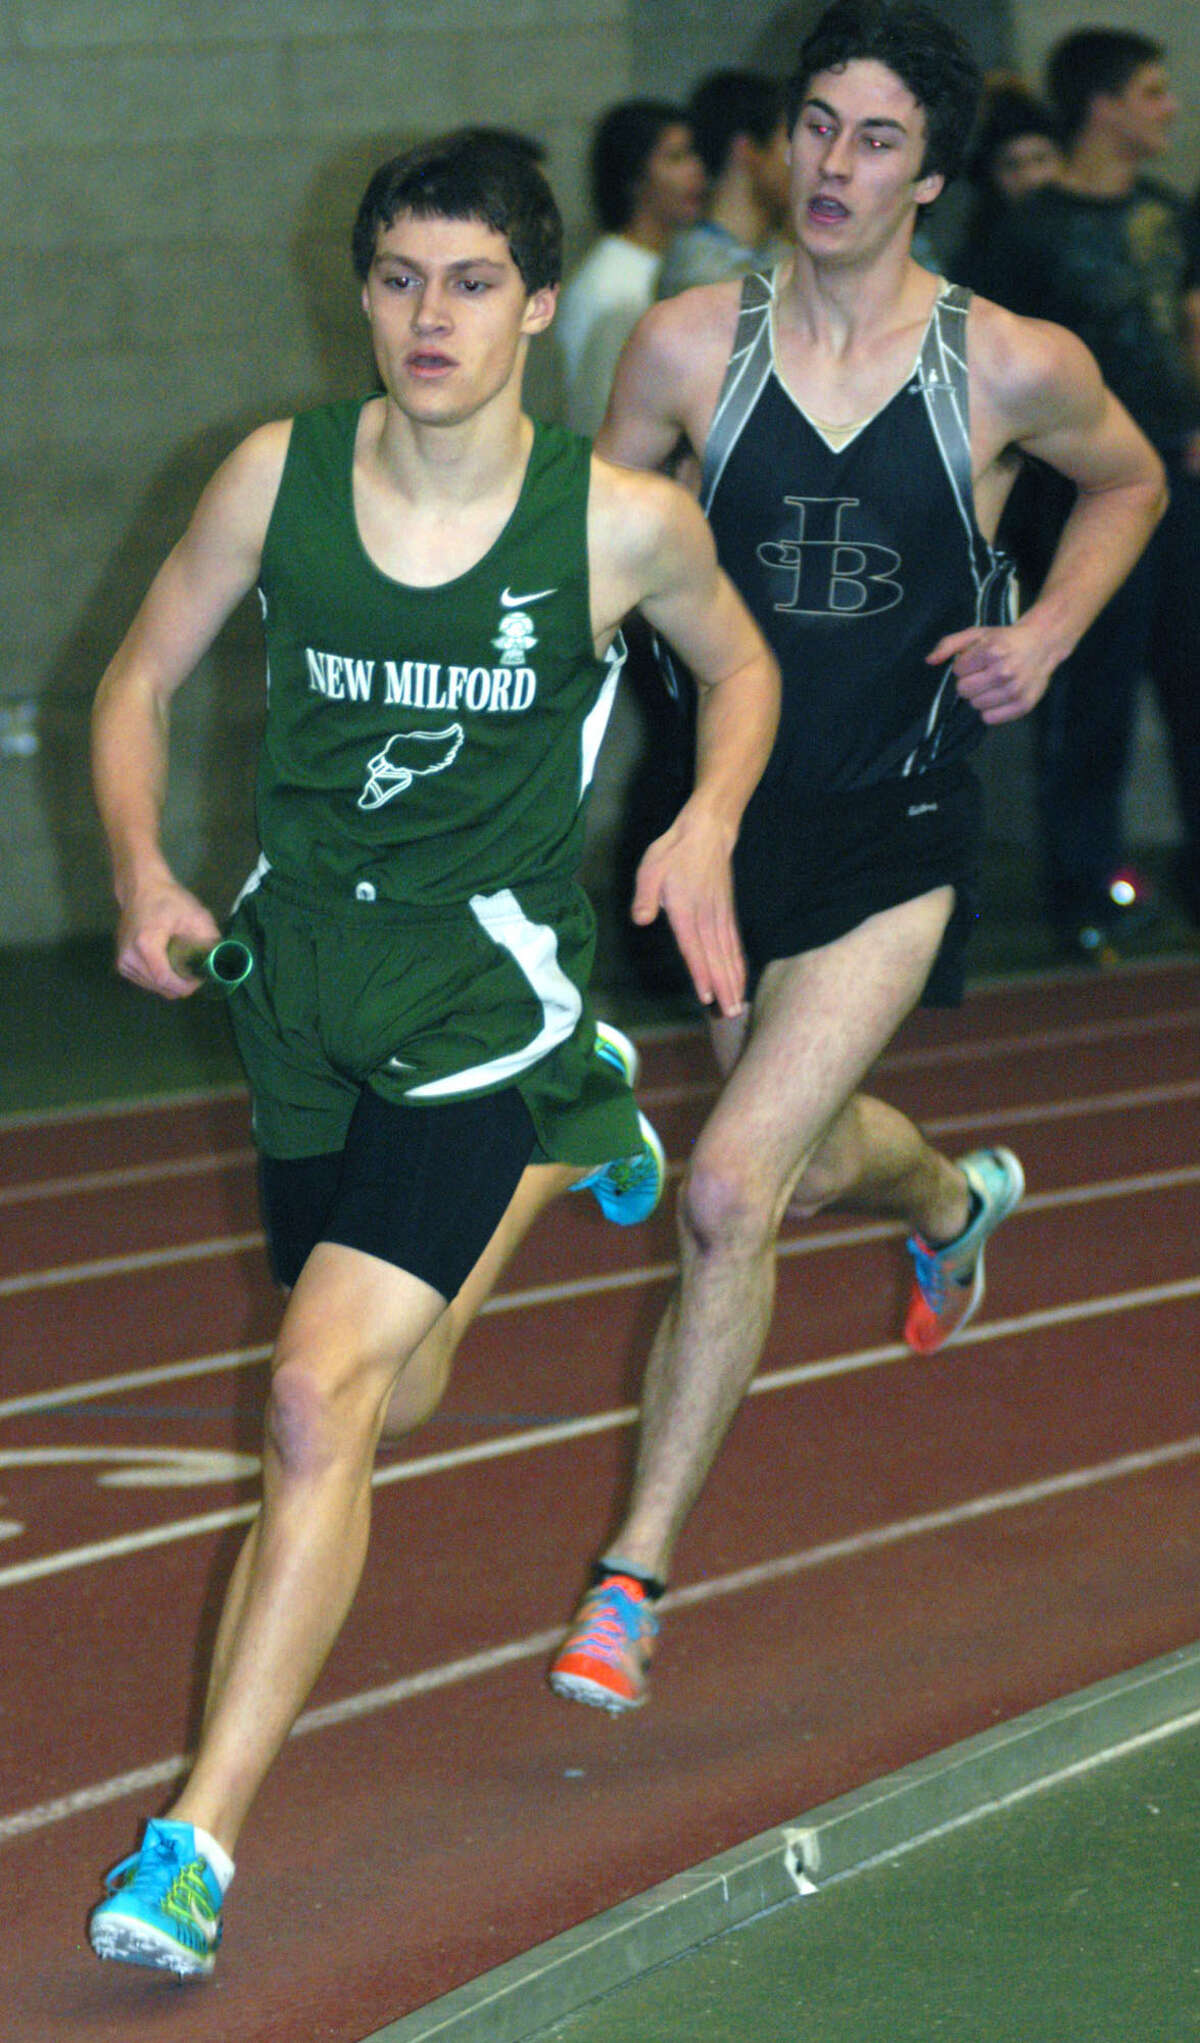 The Green Wave's Hugh Sichel turns the corner for home on his leg of the 4 x 800-meter relay for New Milford High School boys' indoor track during the South-West Conference championship meet at Hillhouse High School in New Haven. Feb. 2, 2013